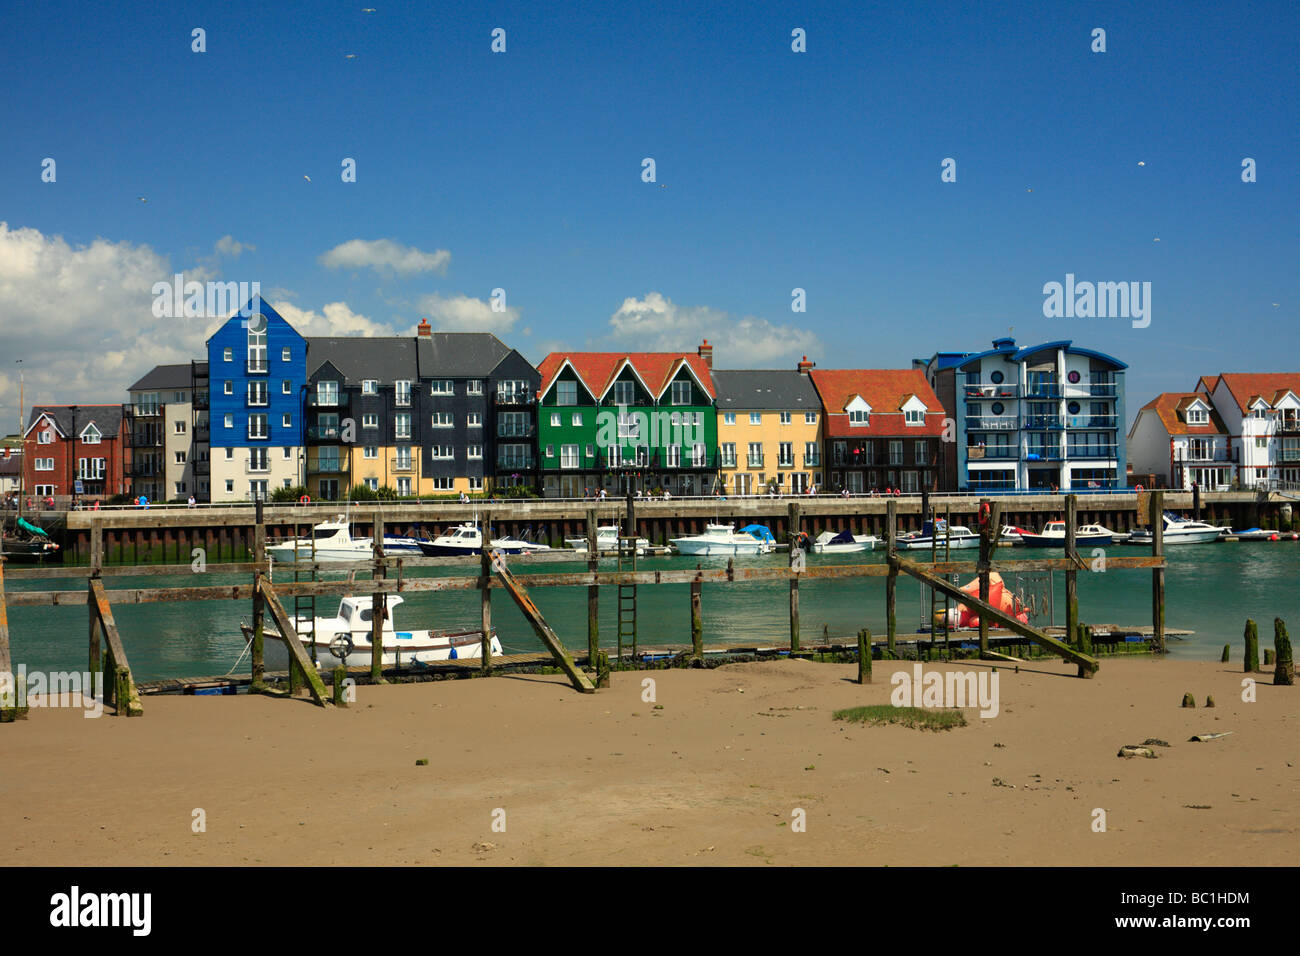 Colourful new apartments on the bank of the River Arun, Pier Road, Littlehampton, West Sussex, England, UK. Stock Photo